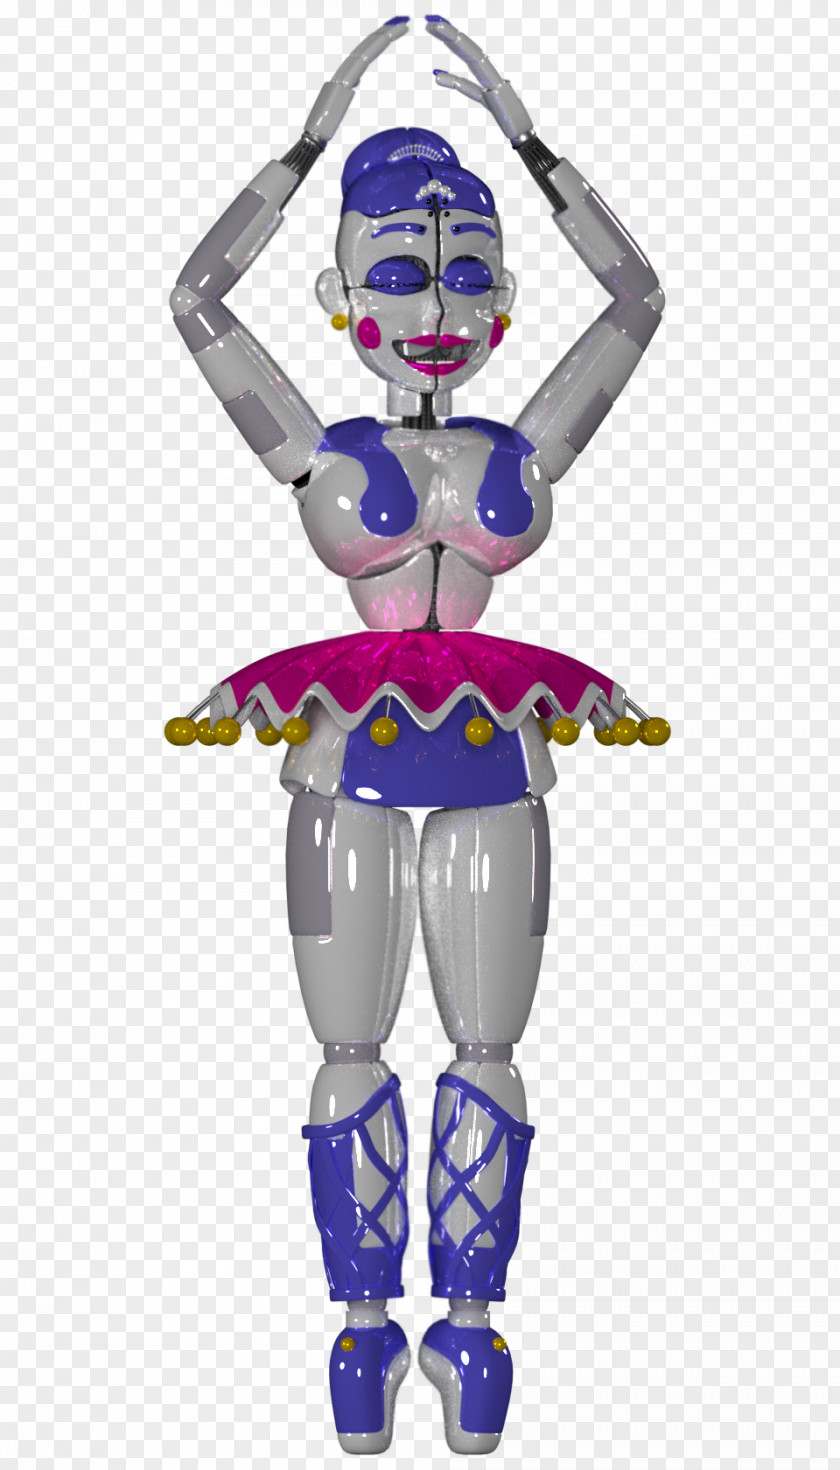 Broken Lines Five Nights At Freddy's: Sister Location Action & Toy Figures Human Body Art 0 PNG